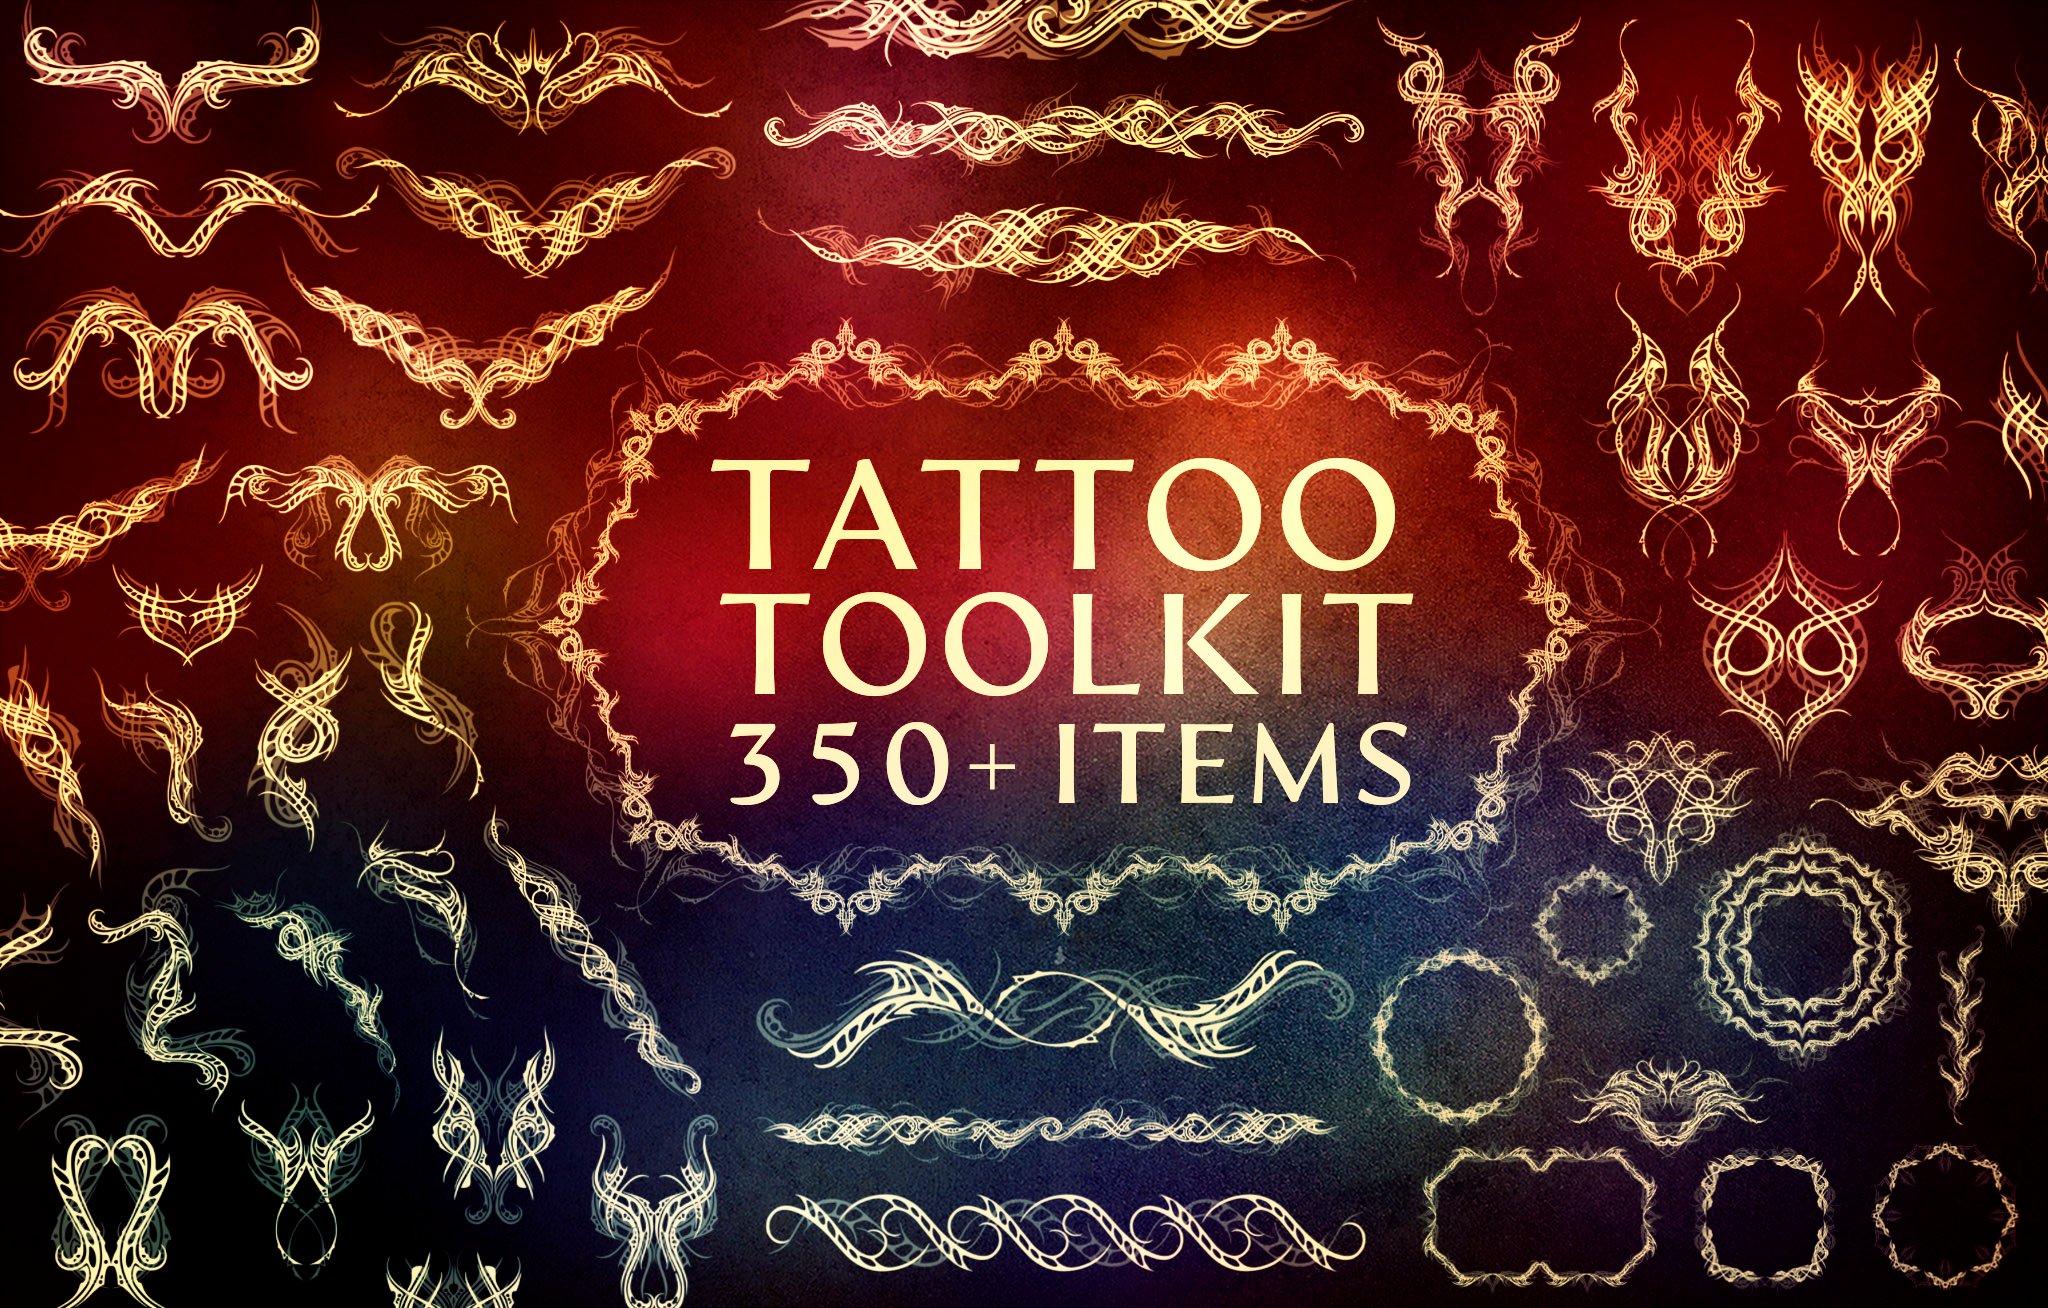 Tattoo Toolkit (Vector, .PNG, Brushes)